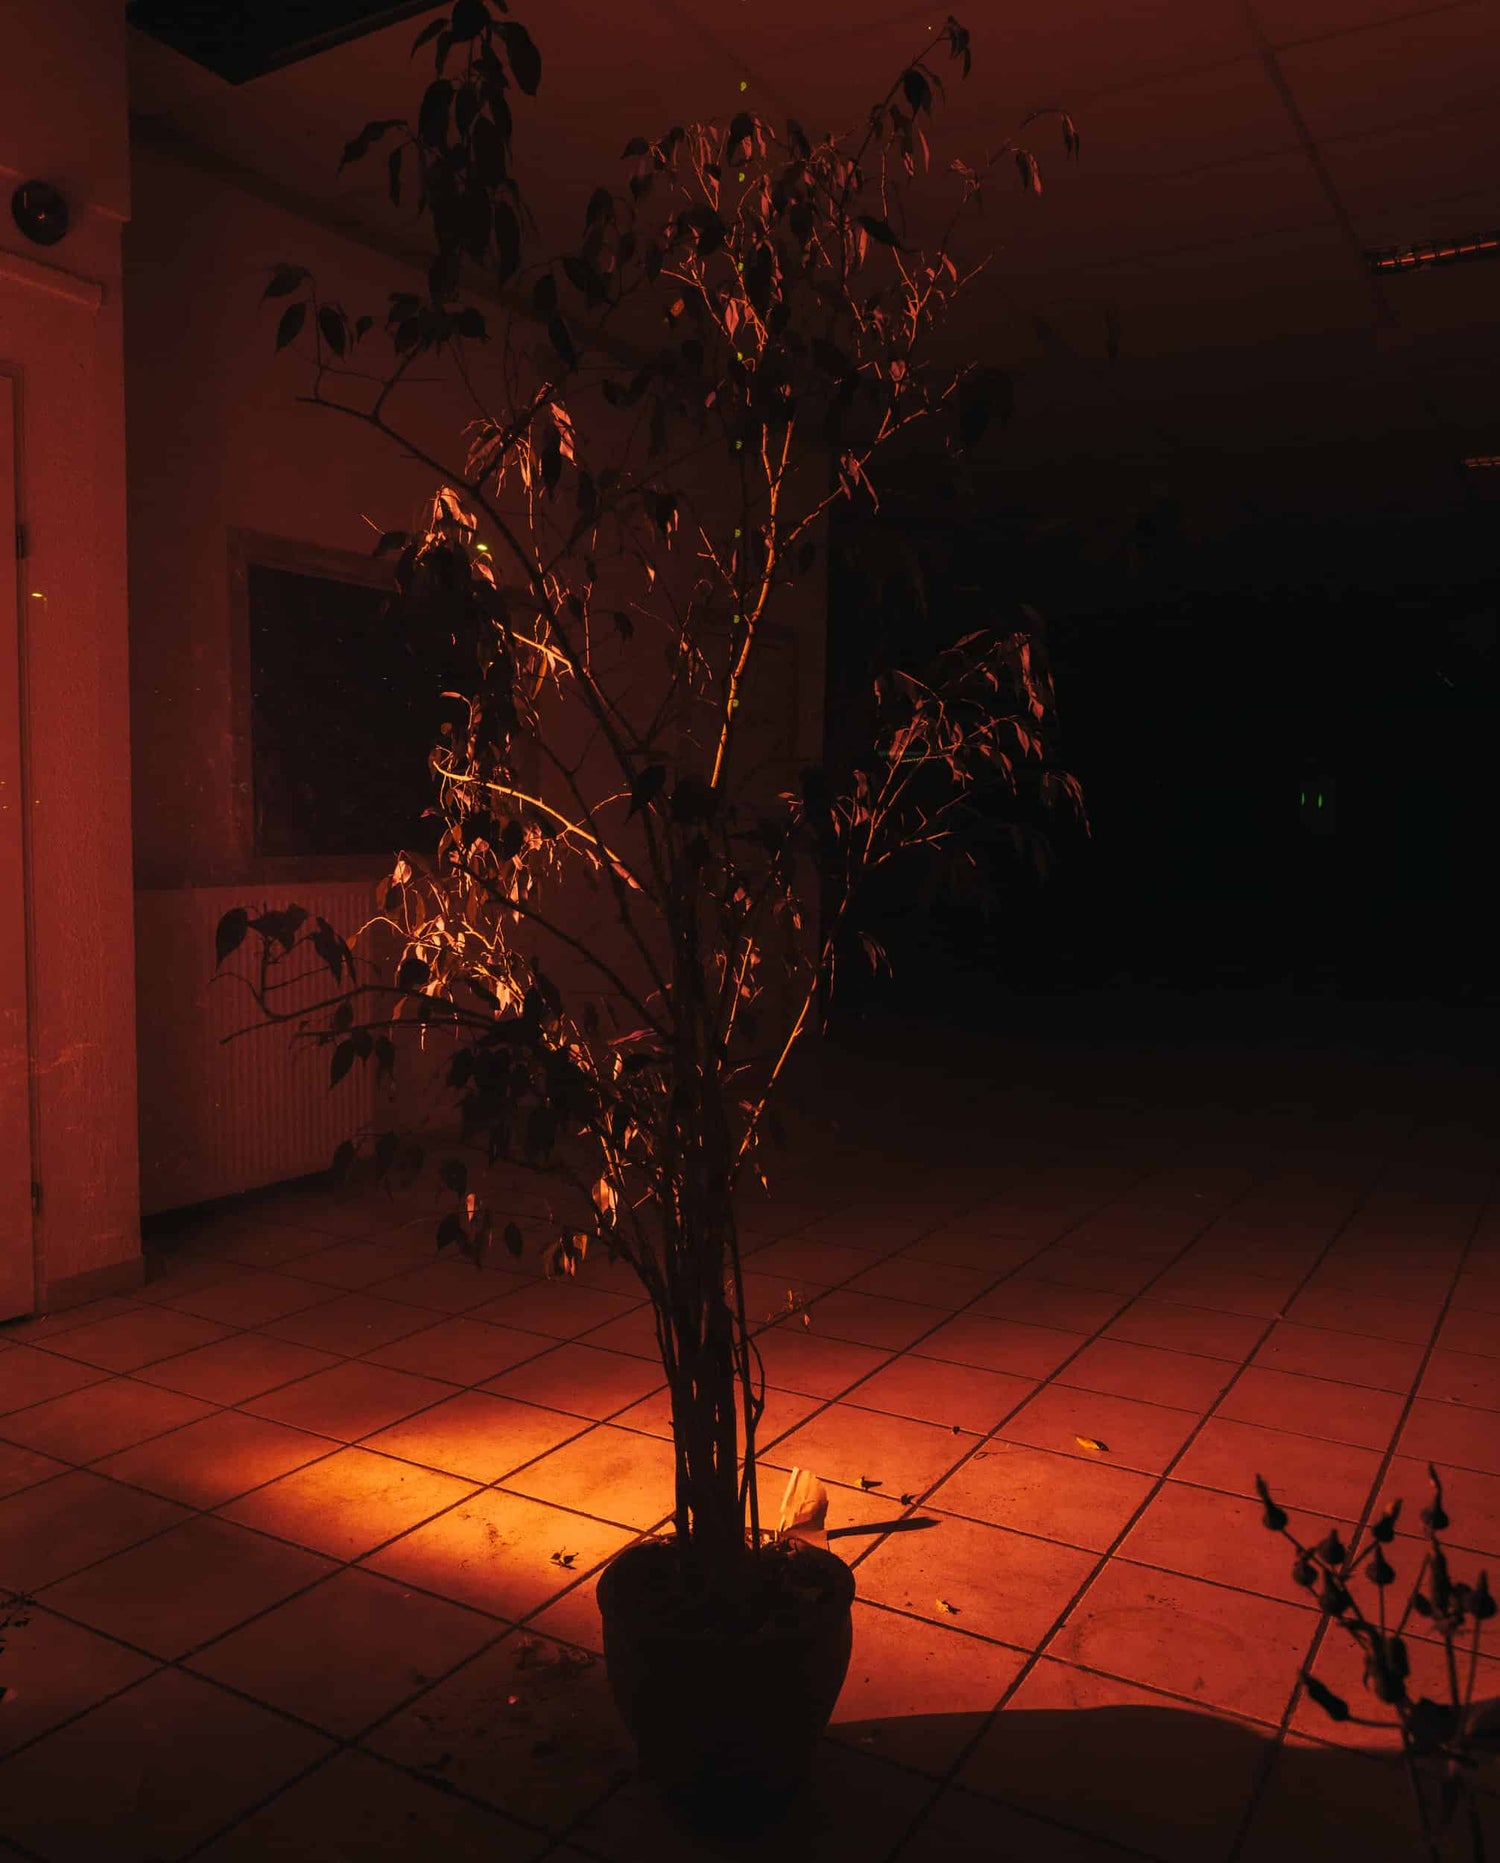 The artpiece 'Amsterdam Noord #6' by Jildo Tim Hof showing a potted tree, standing indoors lit up by a dim orange-red light